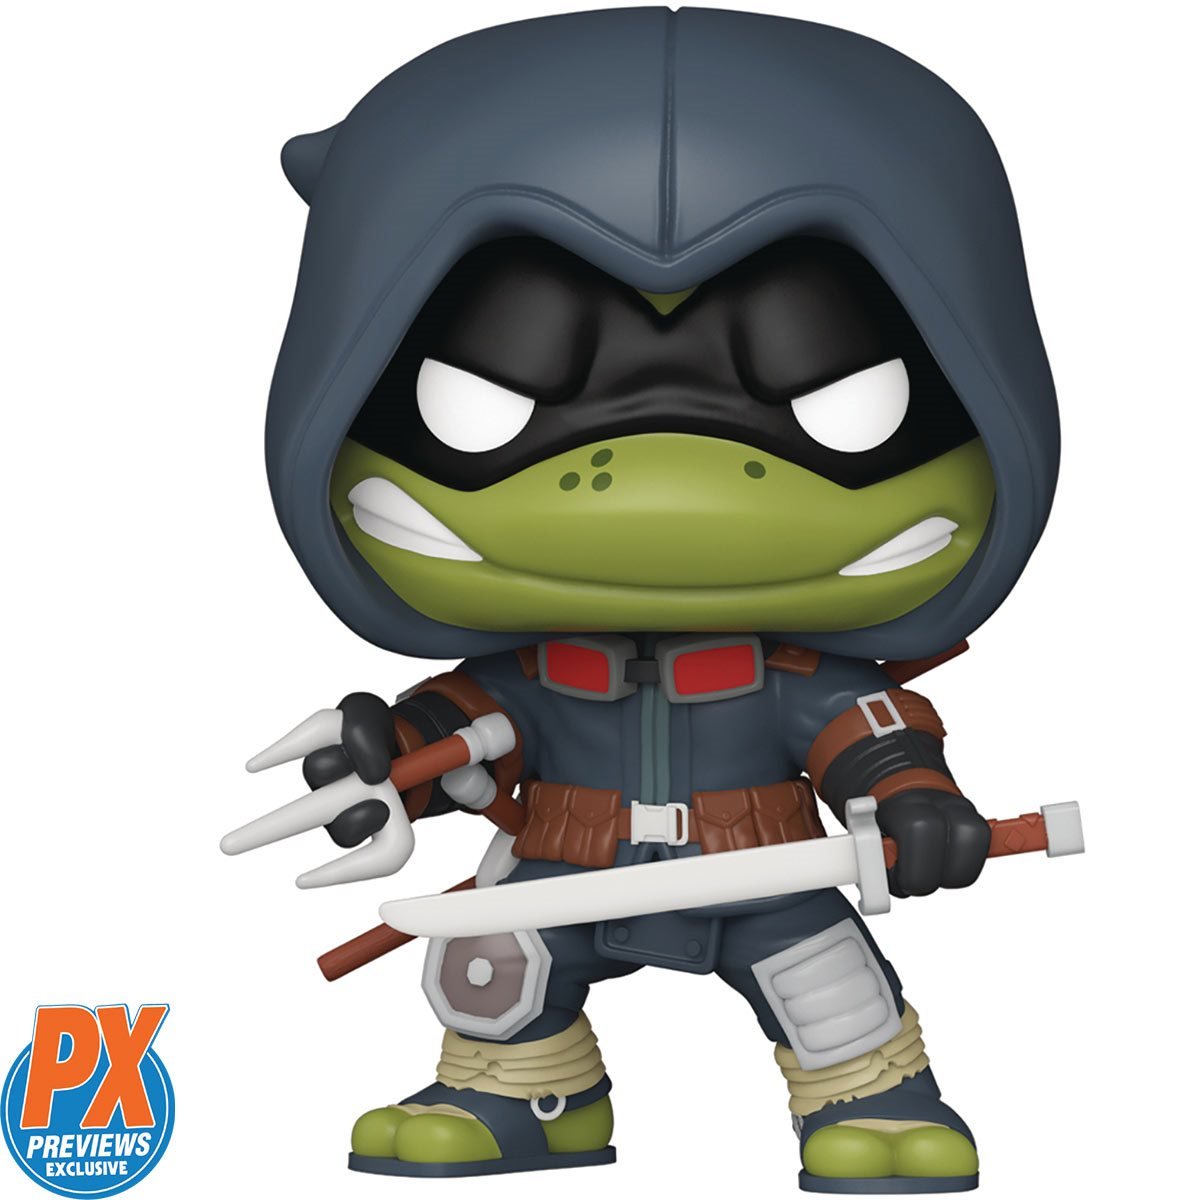 #TheLastRonin #TMNT #FunkoPop  is now available for Pre-Order

ee.toys/SMLSBU